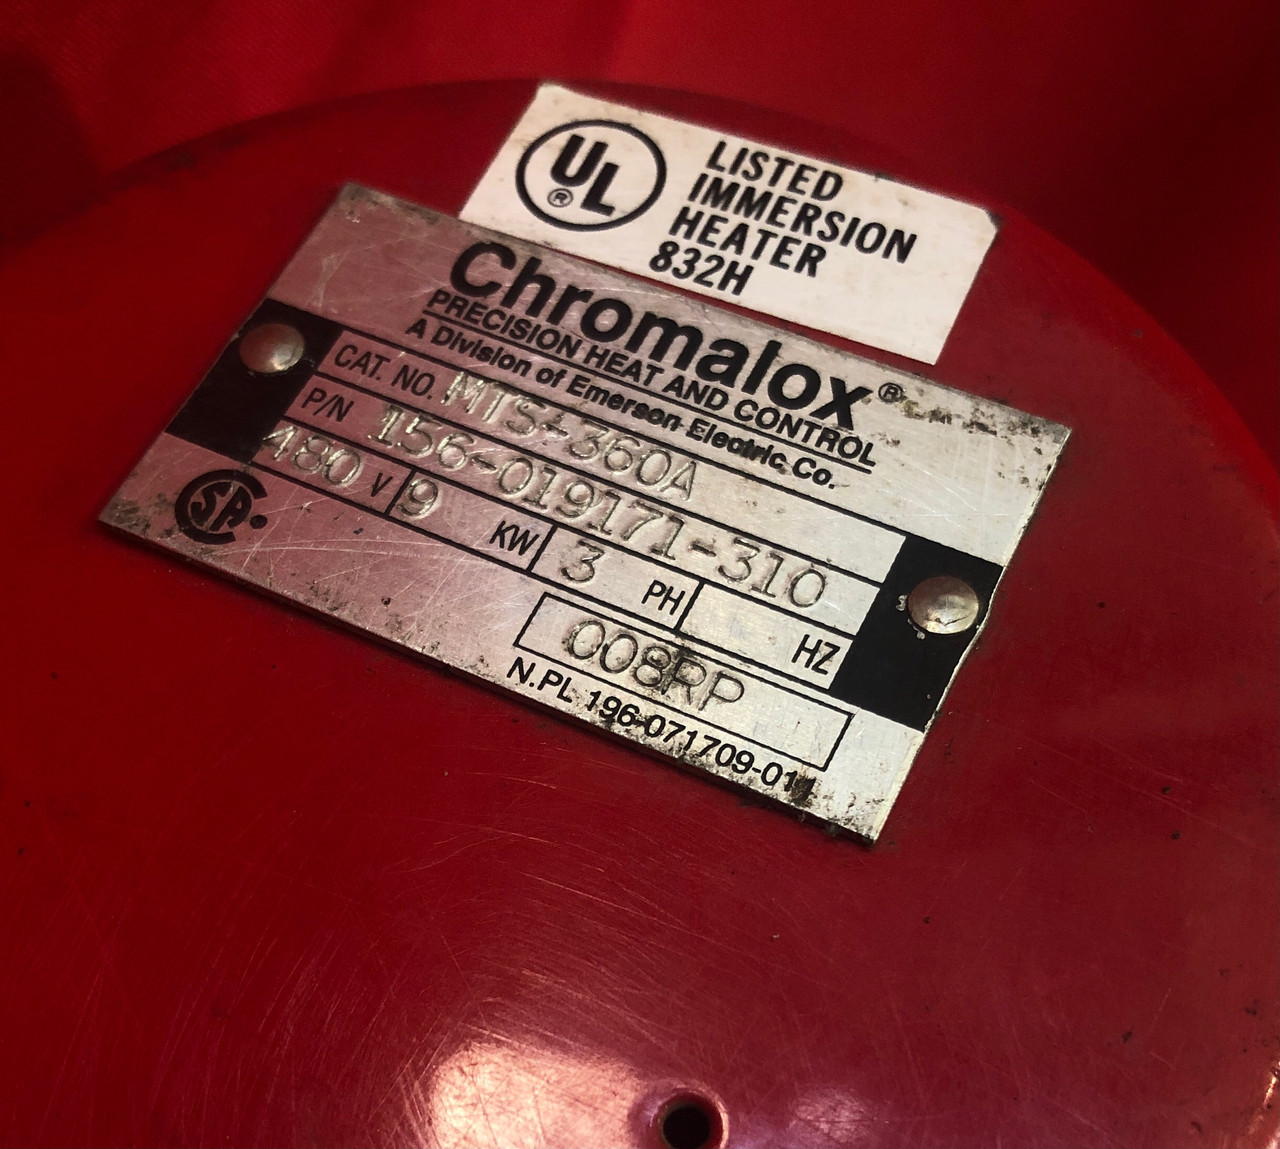 Chromalox MTS-360A, Immersion Heater, 6 kw, 480 volts/3 phase, Stainless Elements, Nema 1 Encl.